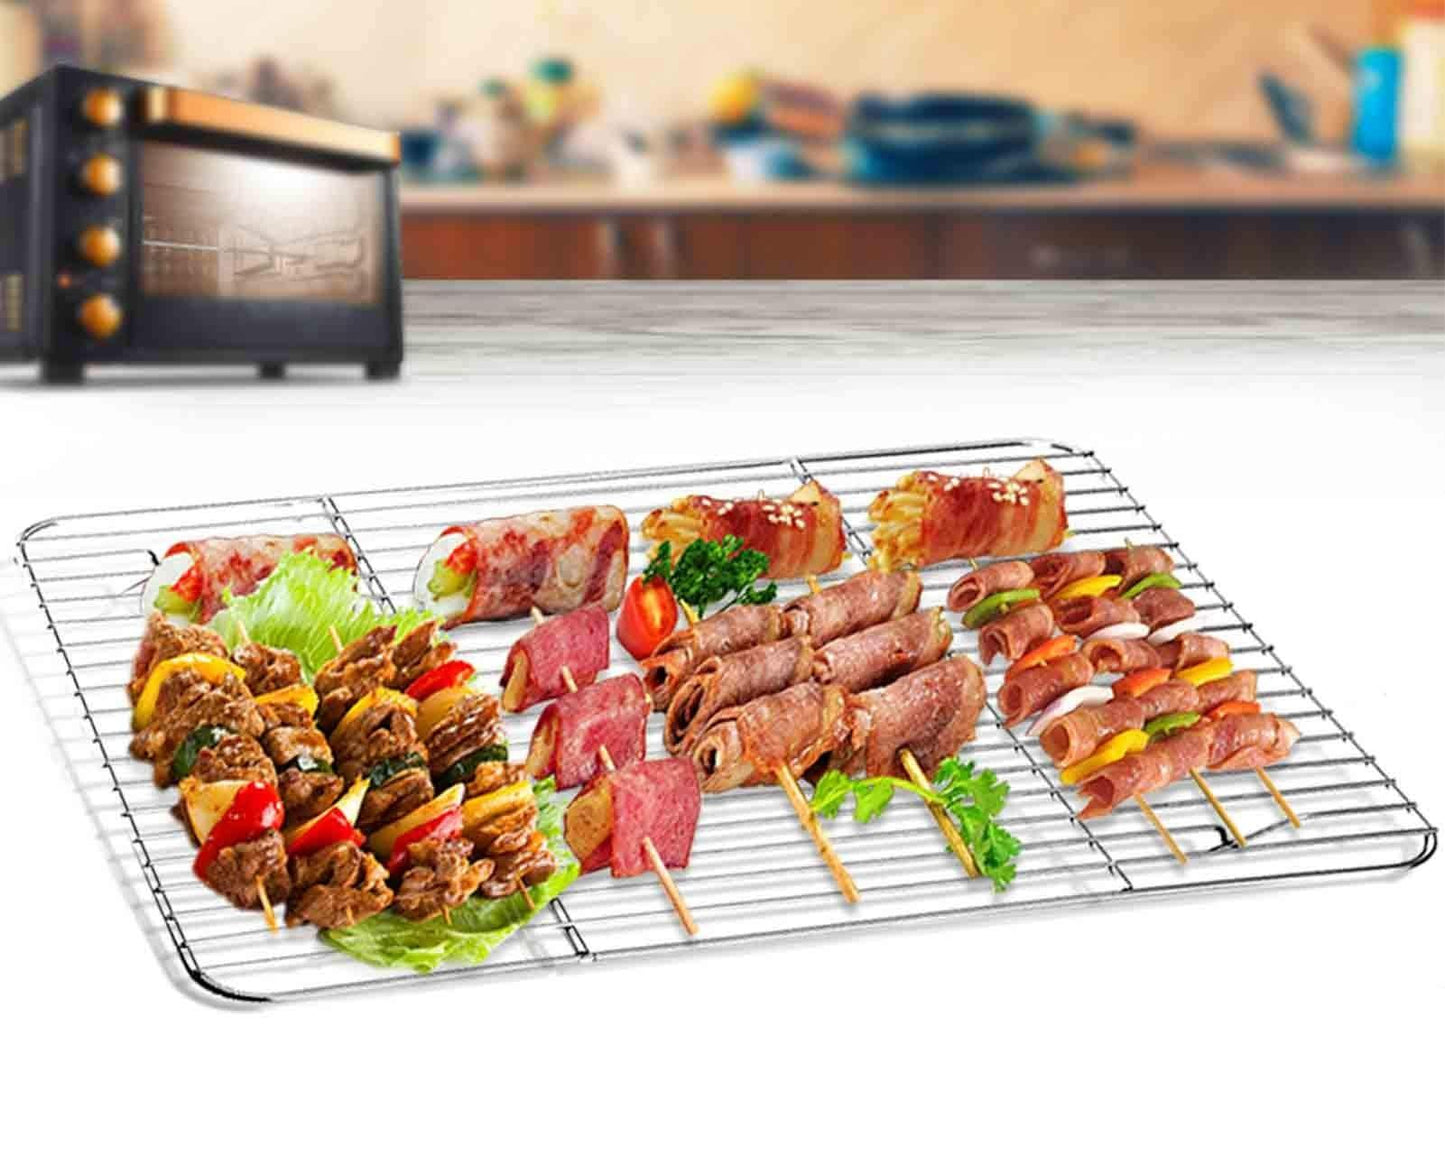 TeamFar Baking Sheet with Rack Set of 8, Cookie Sheet Baking Pans Stainless Steel Bakeware with Cooling Rack Set, Non Toxic & Healthy, Mirror Finish & Rust Free, Easy Clean & Dishwasher Safe - CookCave